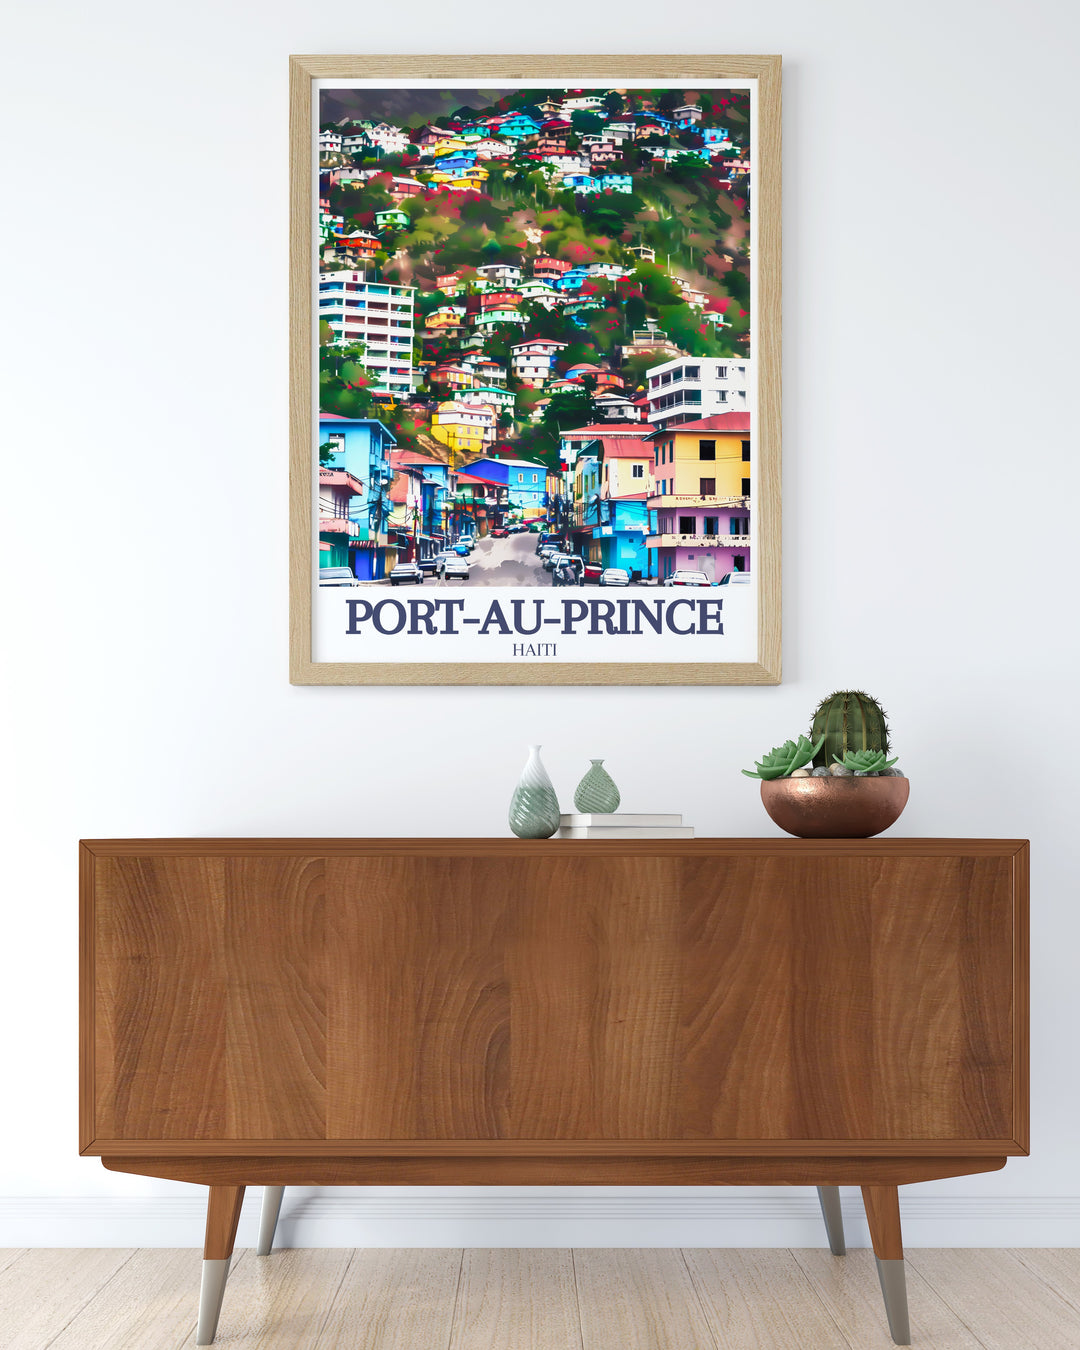 Elegant Haiti Wall Art featuring the picturesque views of Pétion Ville Massif de la Selle perfect for anniversary gifts birthday gifts and Christmas gifts adding sophistication to any space